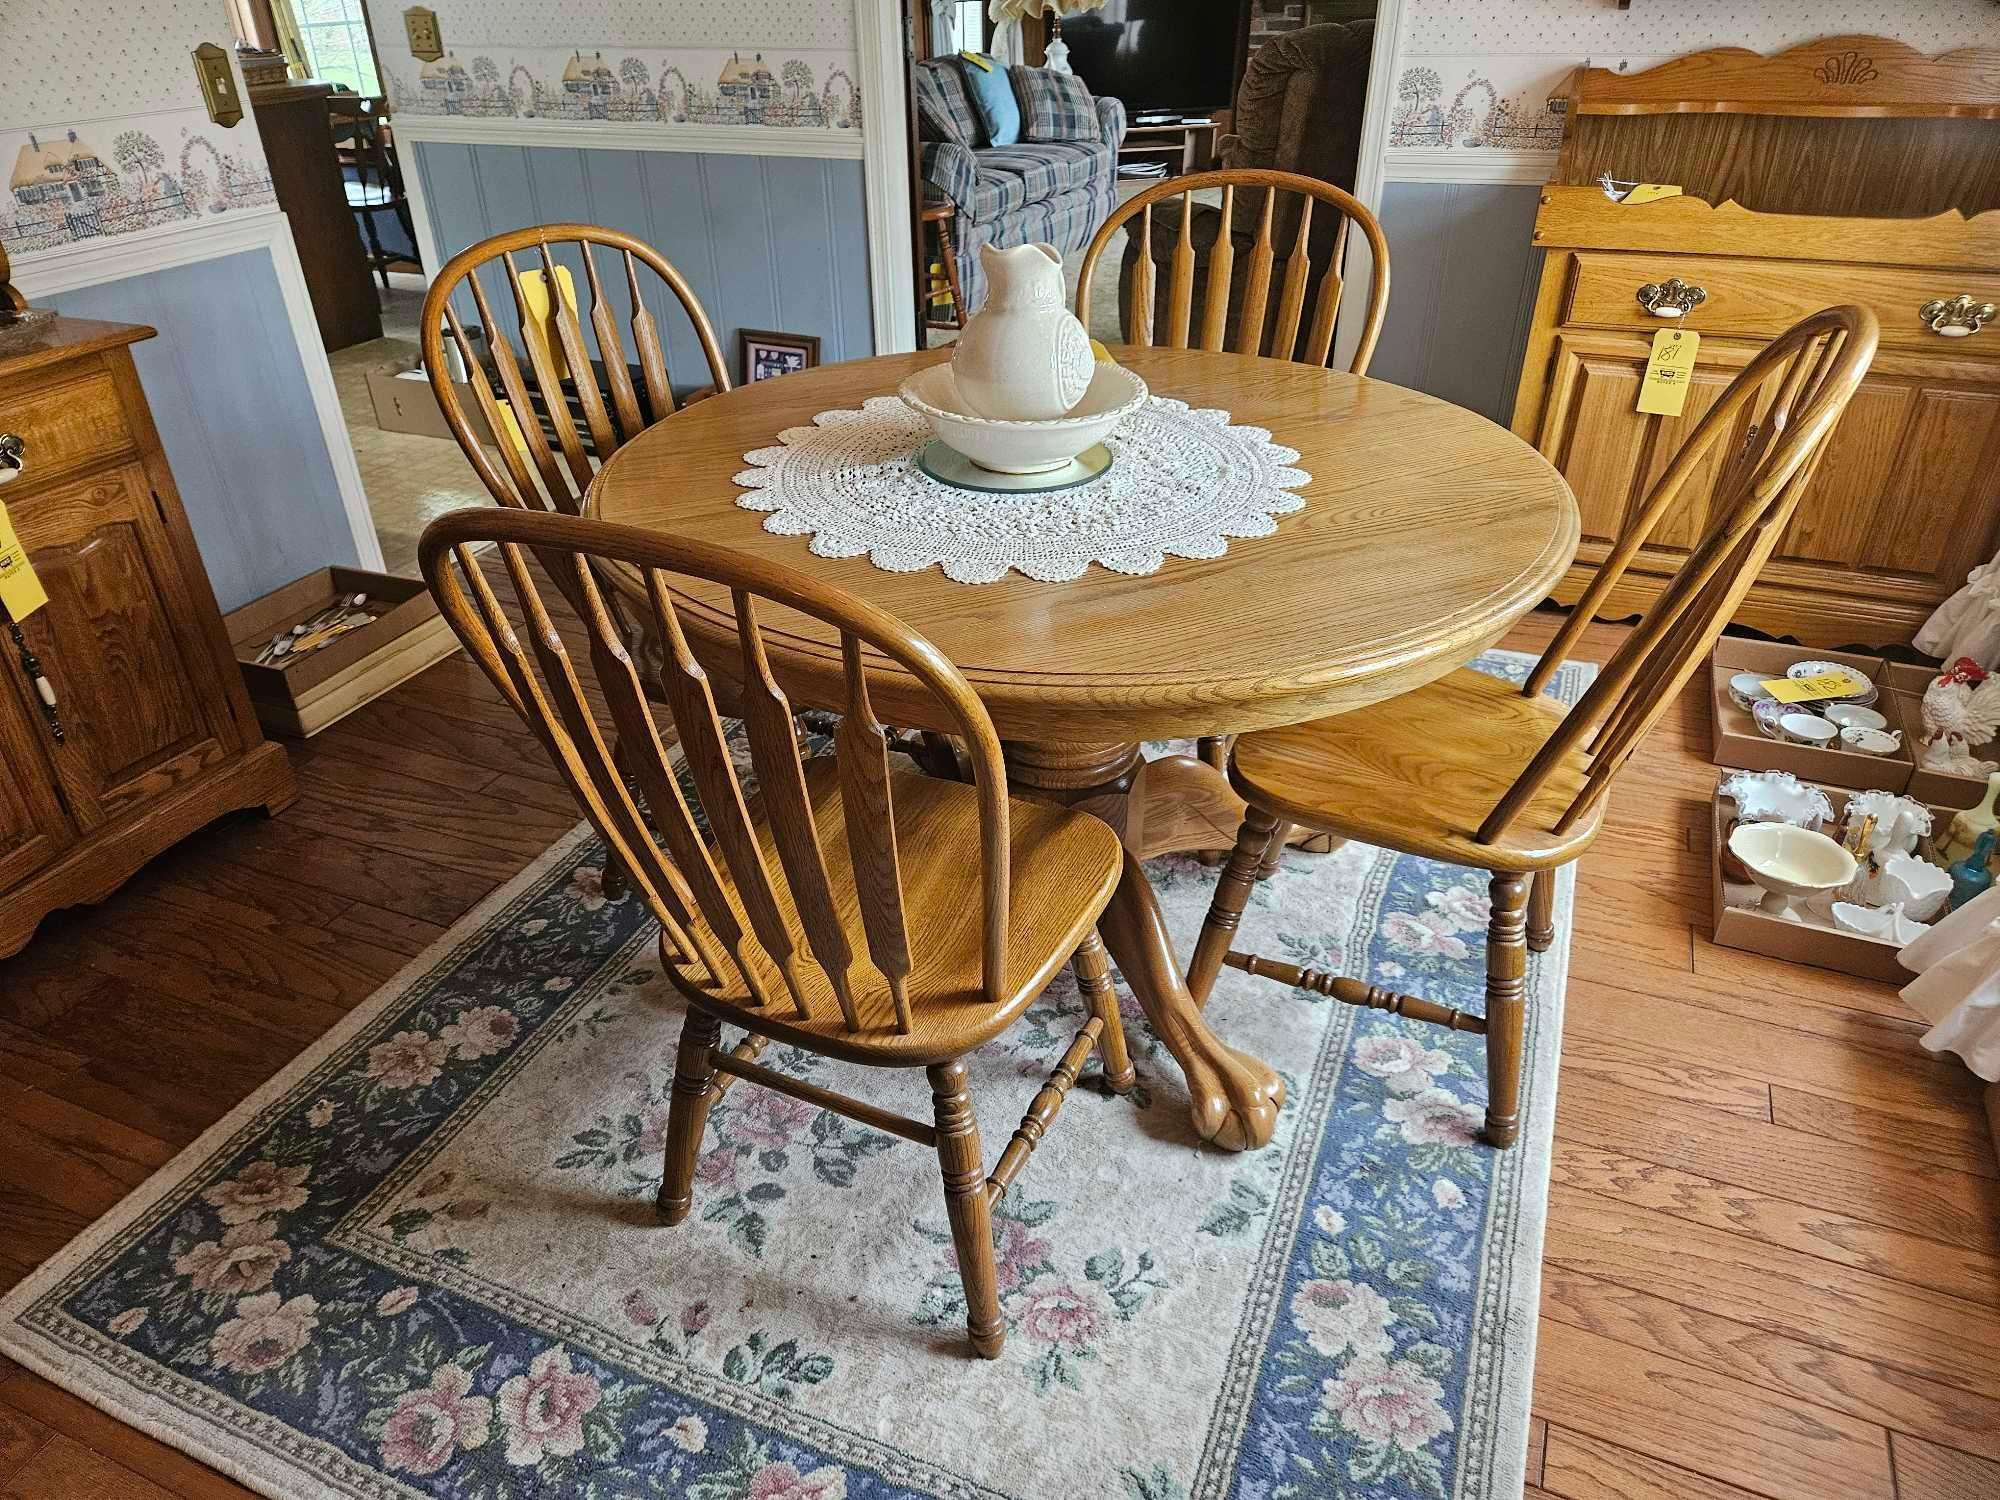 Solid Oak Claw-foot Pedestal Table with 4 Chairs by Cochrane Furniture - Nice